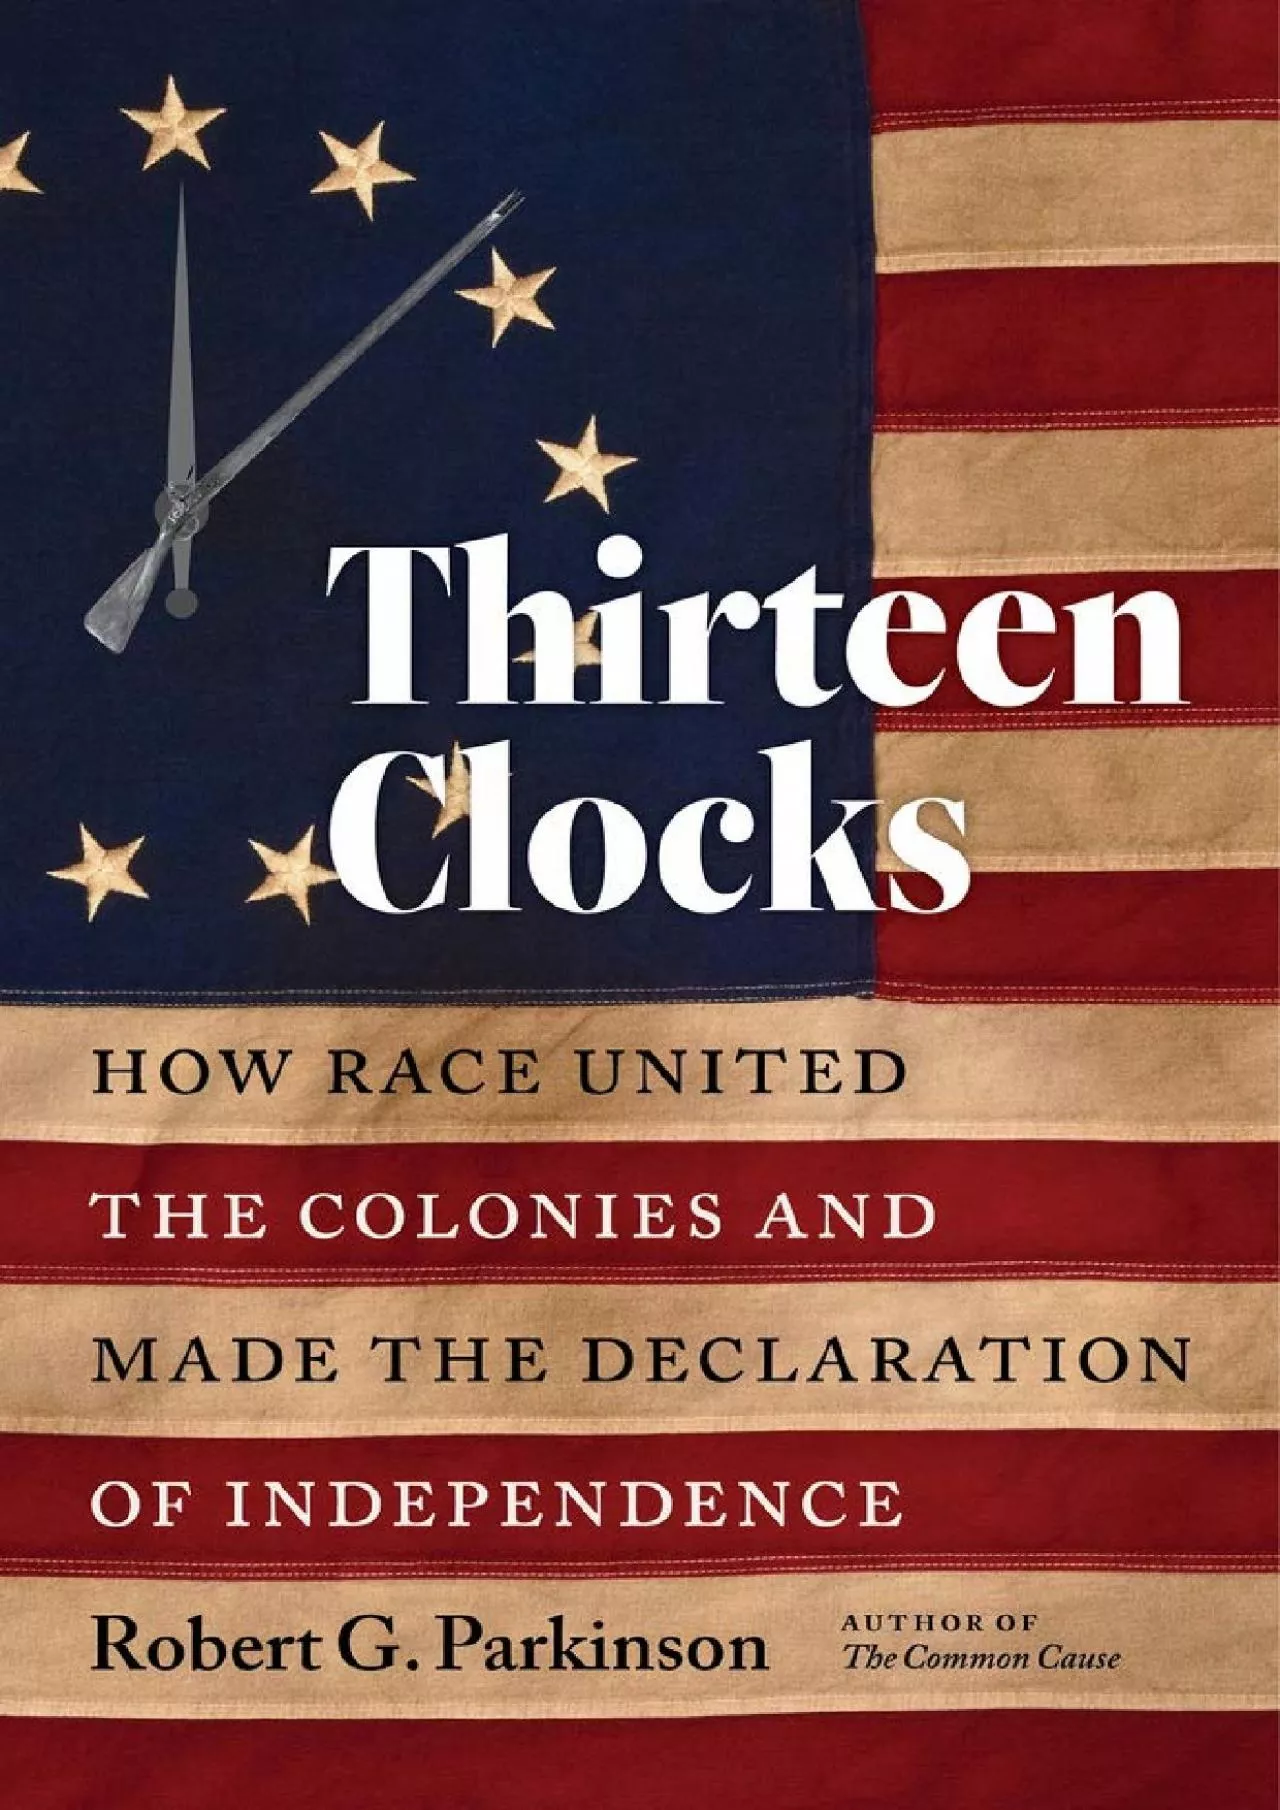 (BOOK)-Thirteen Clocks: How Race United the Colonies and Made the Declaration of Independence